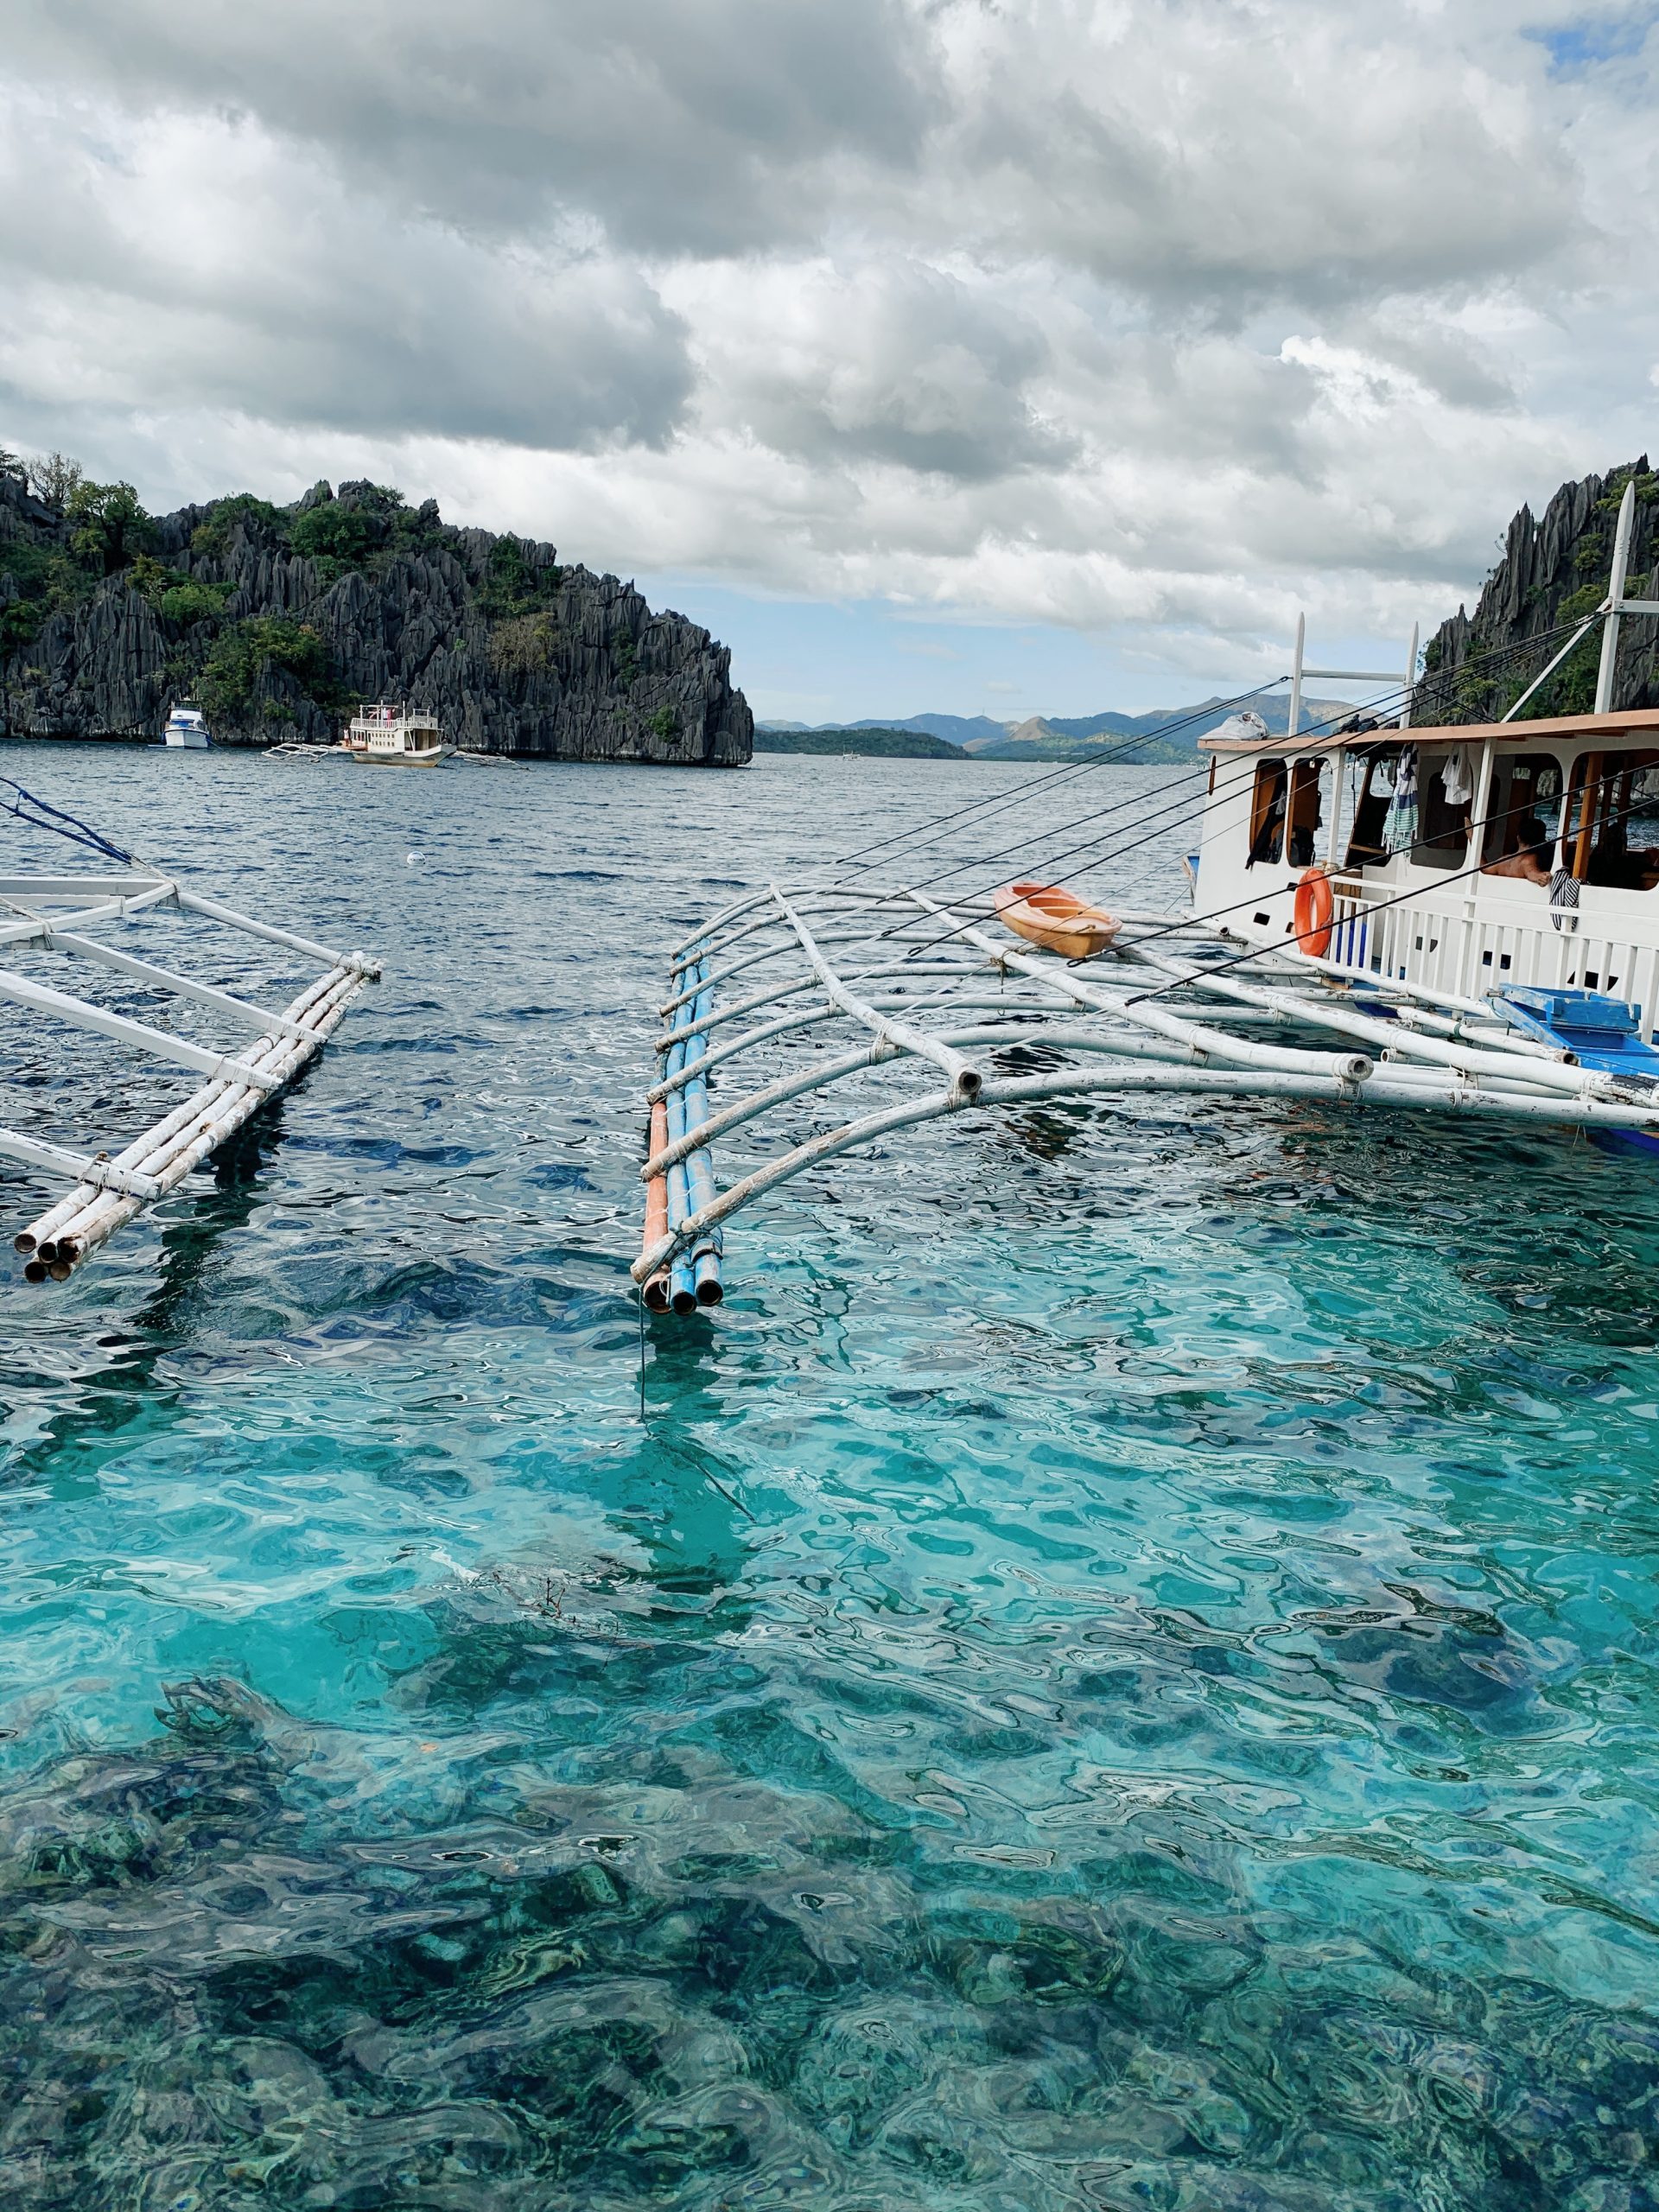 What To Do In Coron - A 4 Days In Coron Itinerary